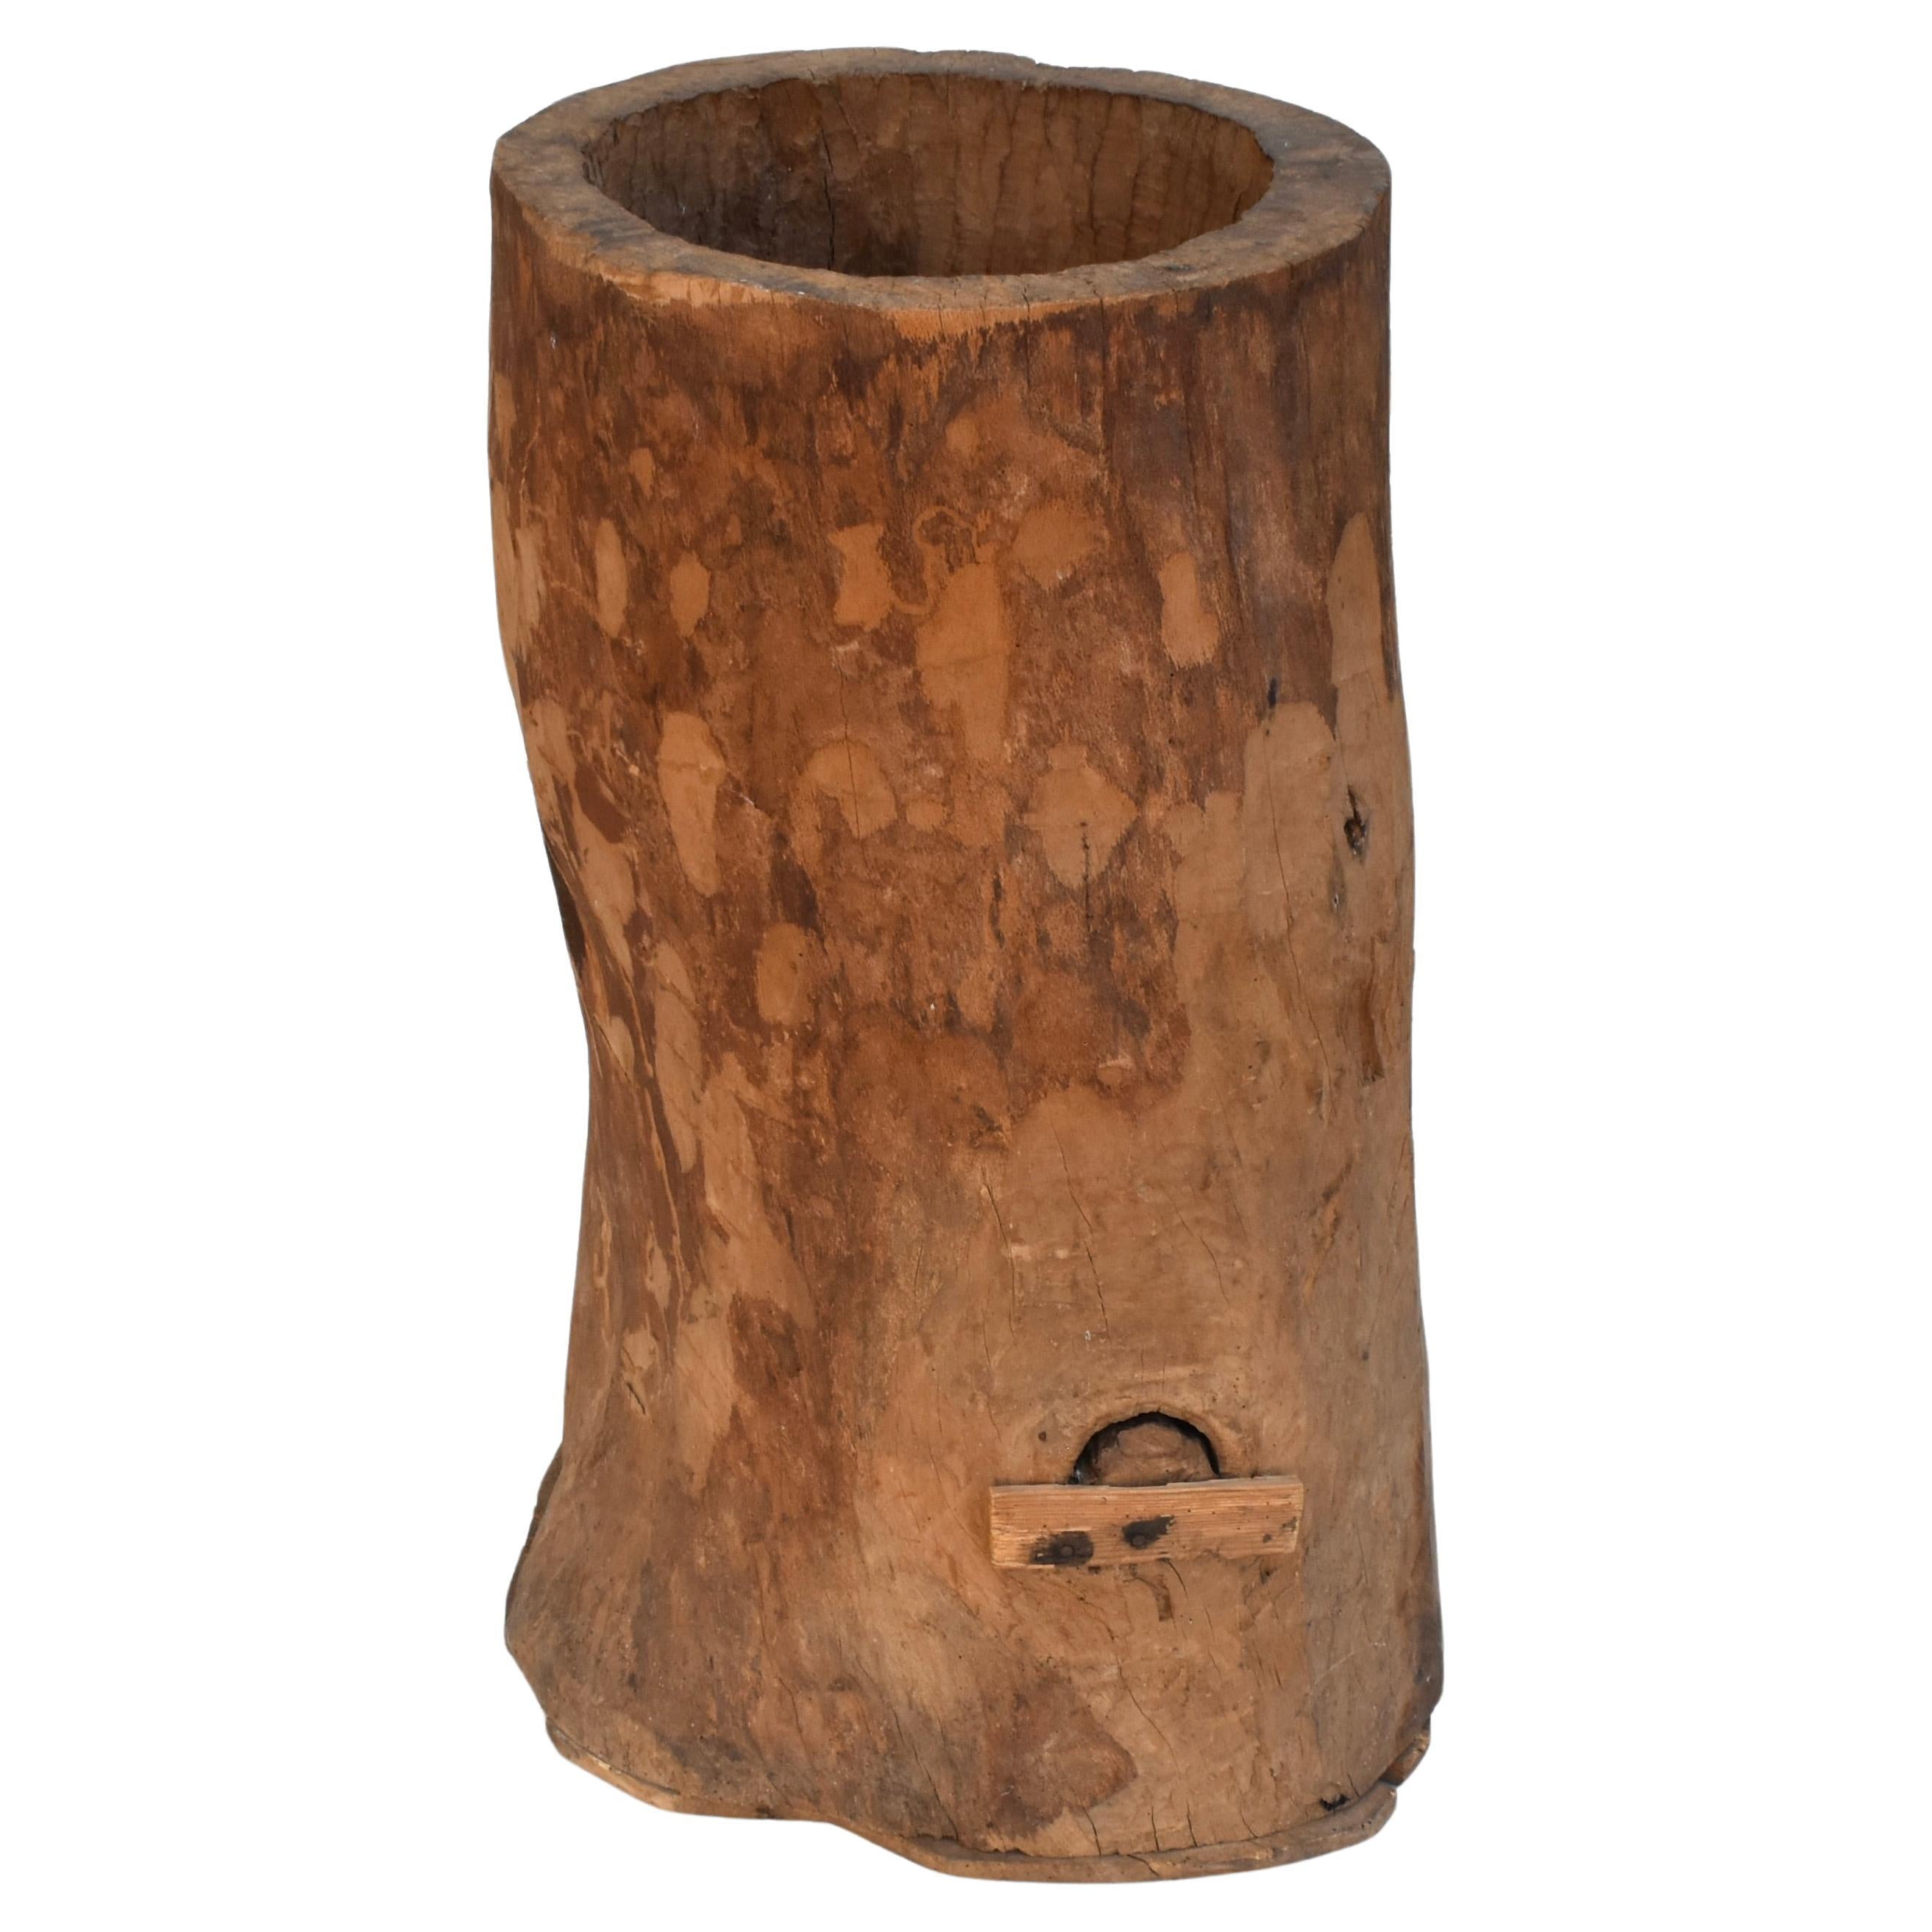 19th Century French Antique Hollowed Tree Trunk Wooden Planter Vessel, Late 19th C. France For Sale